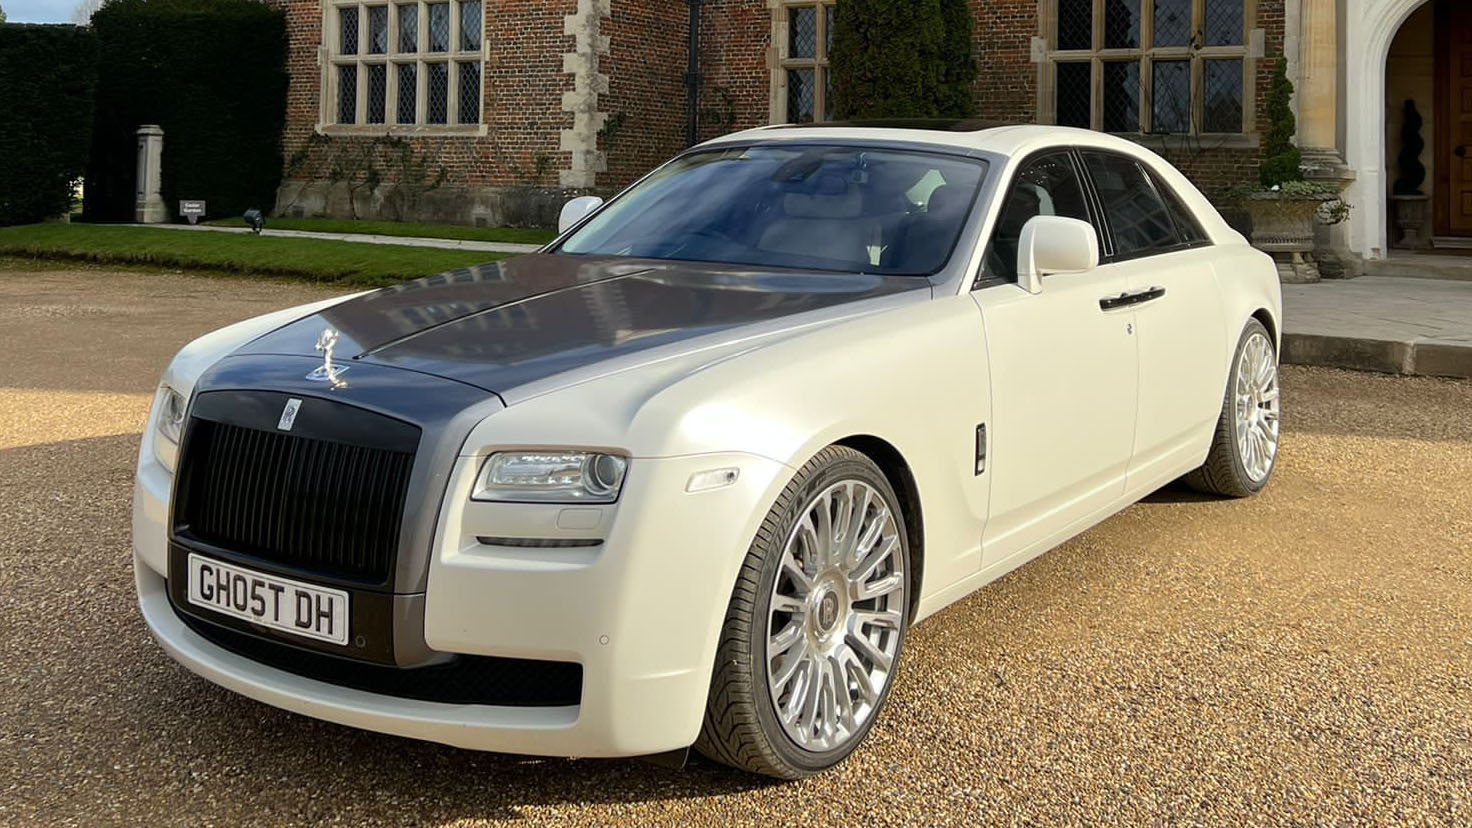 Rolls-Royce Ghost Facelift wedding car for hire in West London